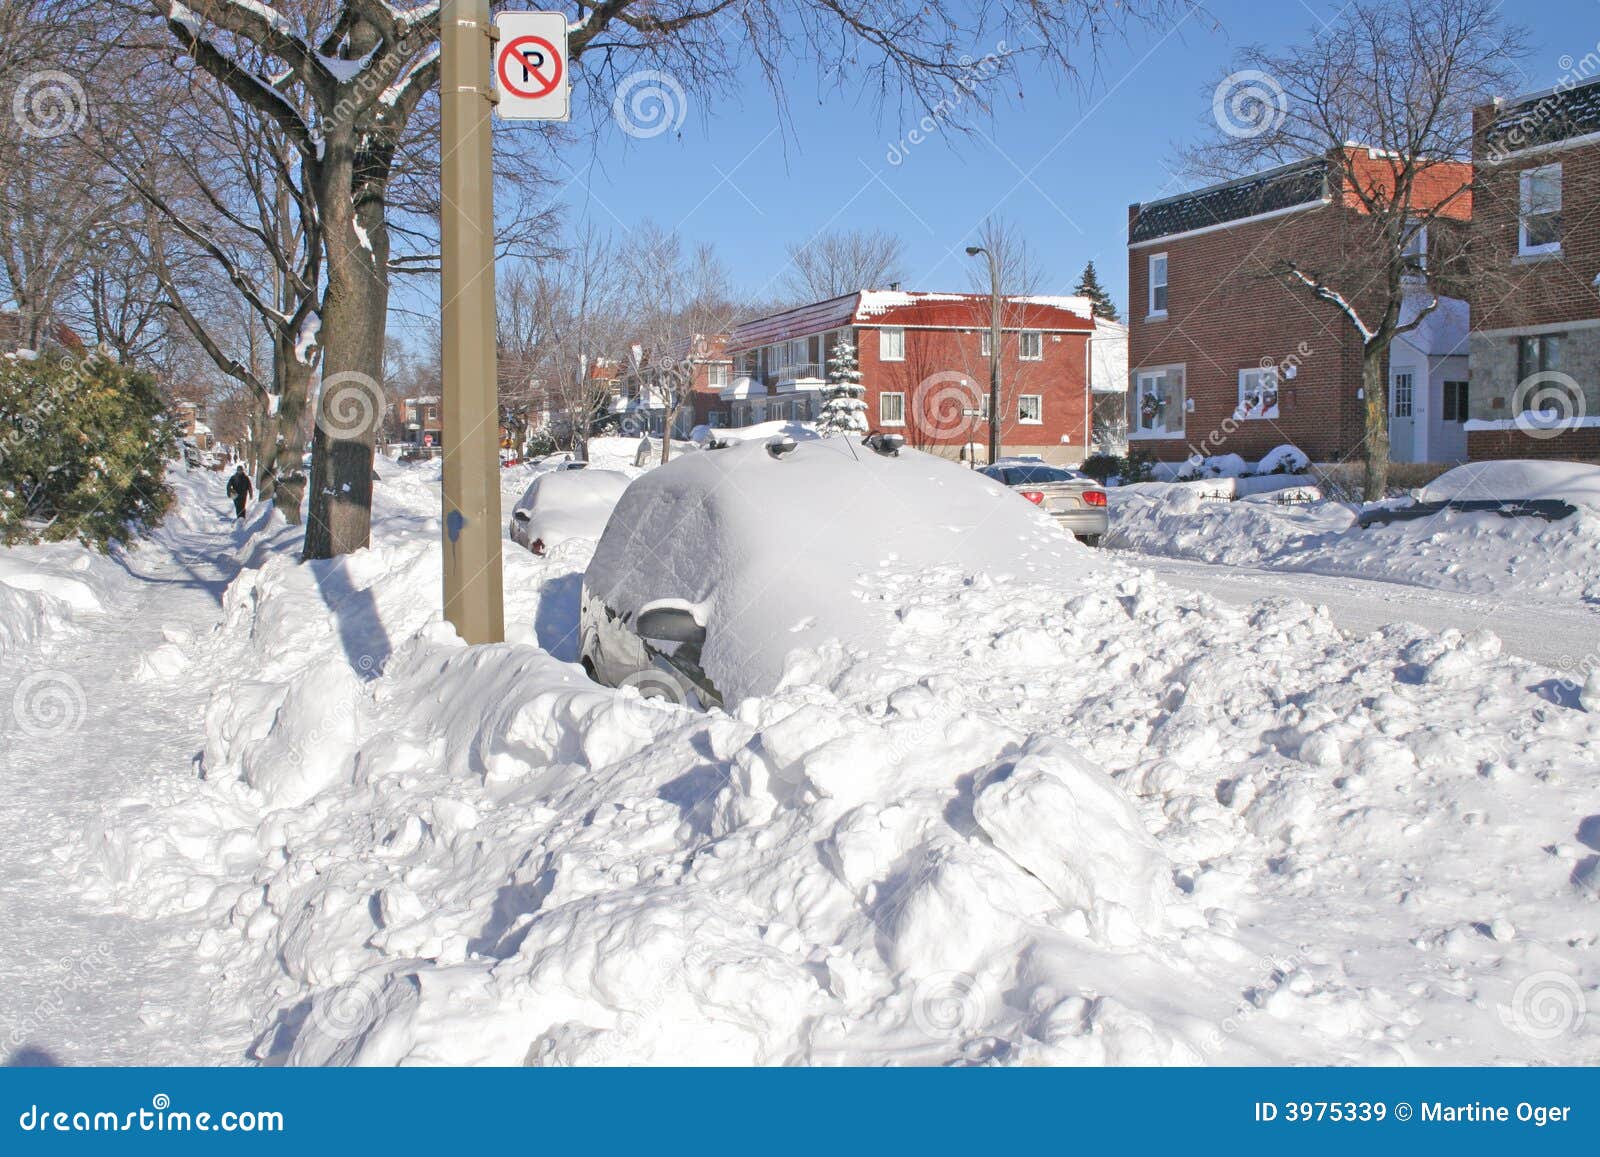 Snow covered street stock image. Image of path, conditions - 3975339